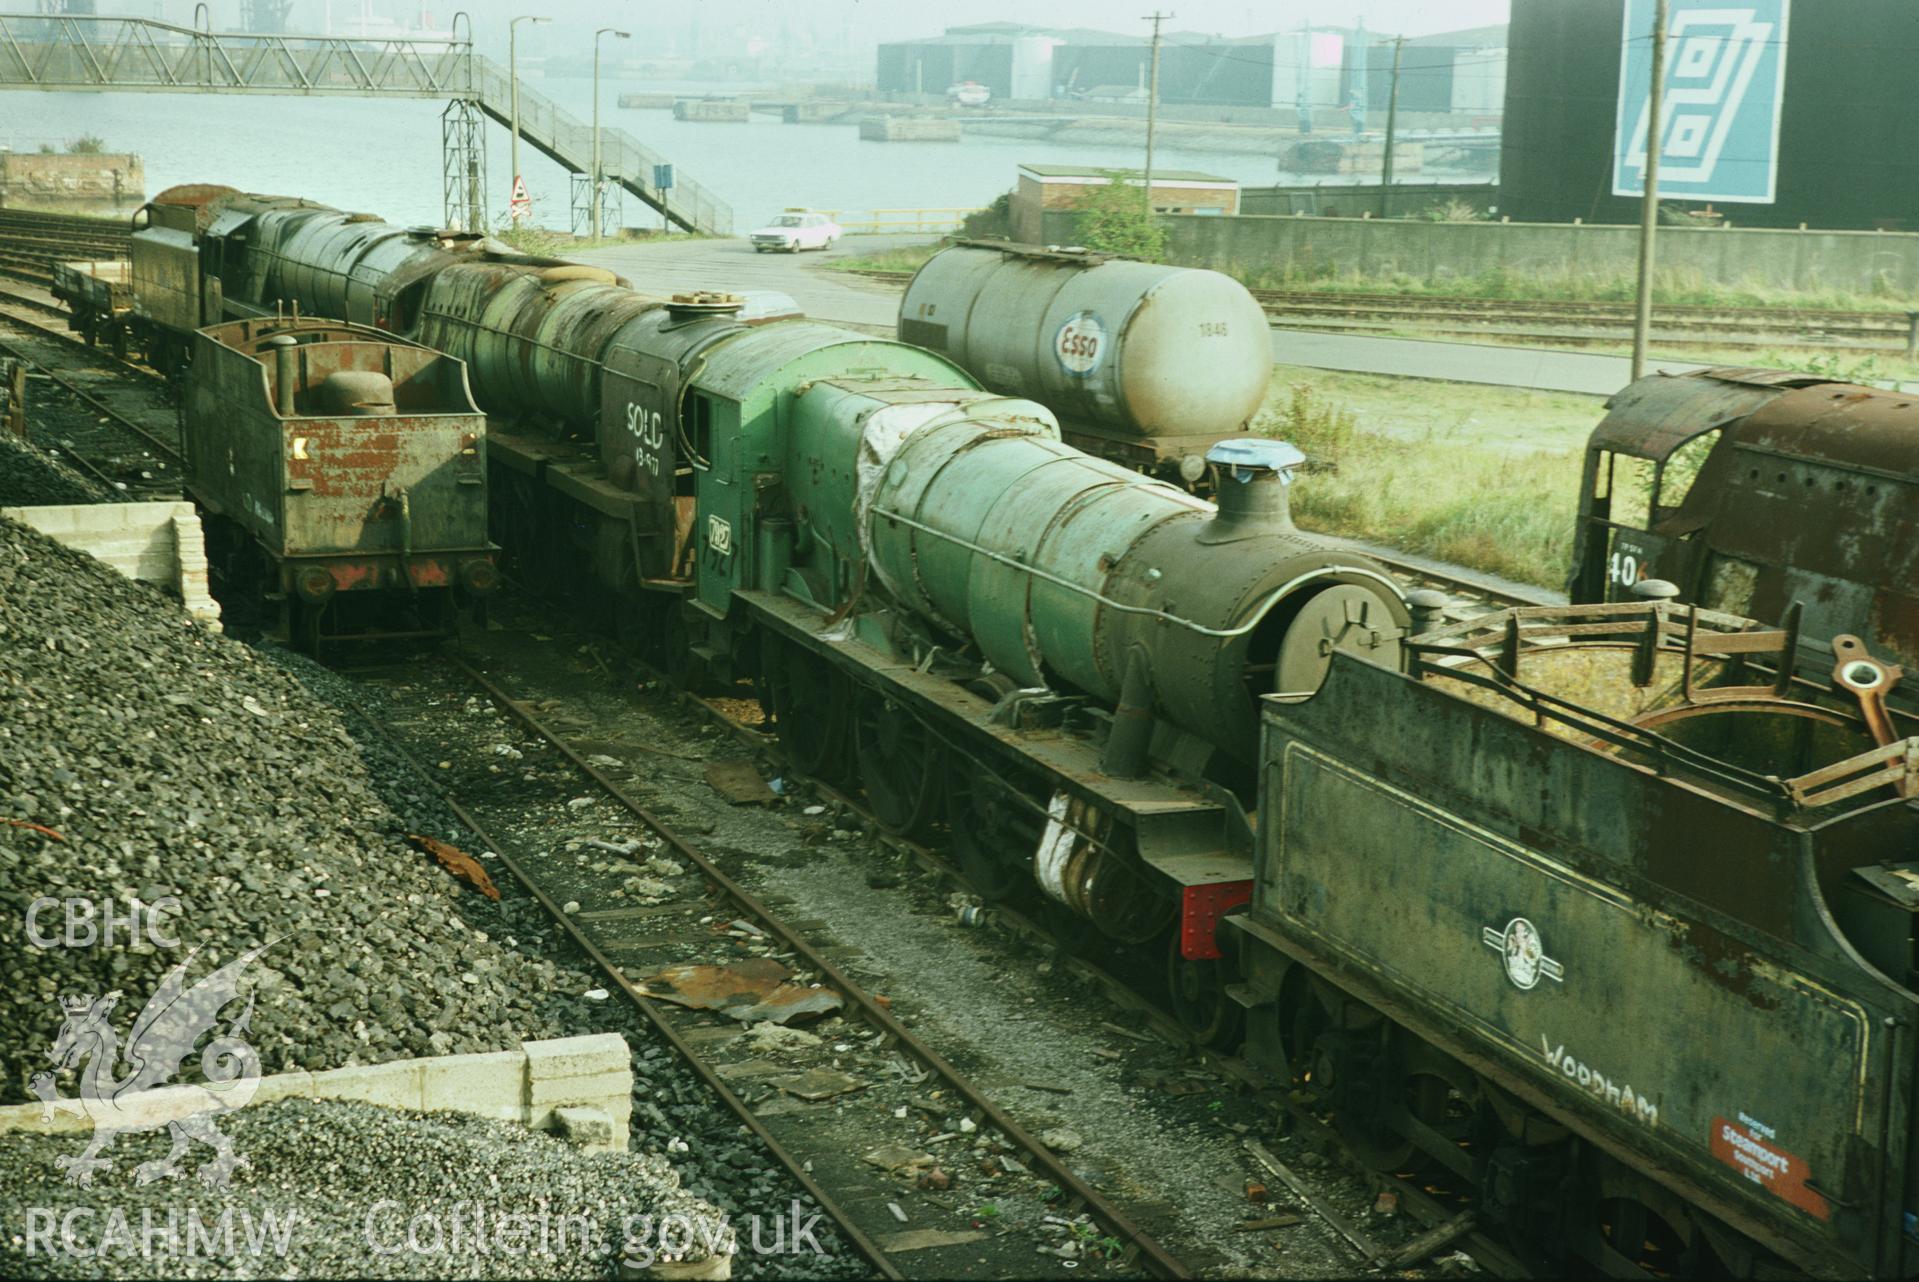 35mm colour slide showing a steam locomotive, at the sidings, Barry Town Station, Glamorgan by Dylan Roberts.